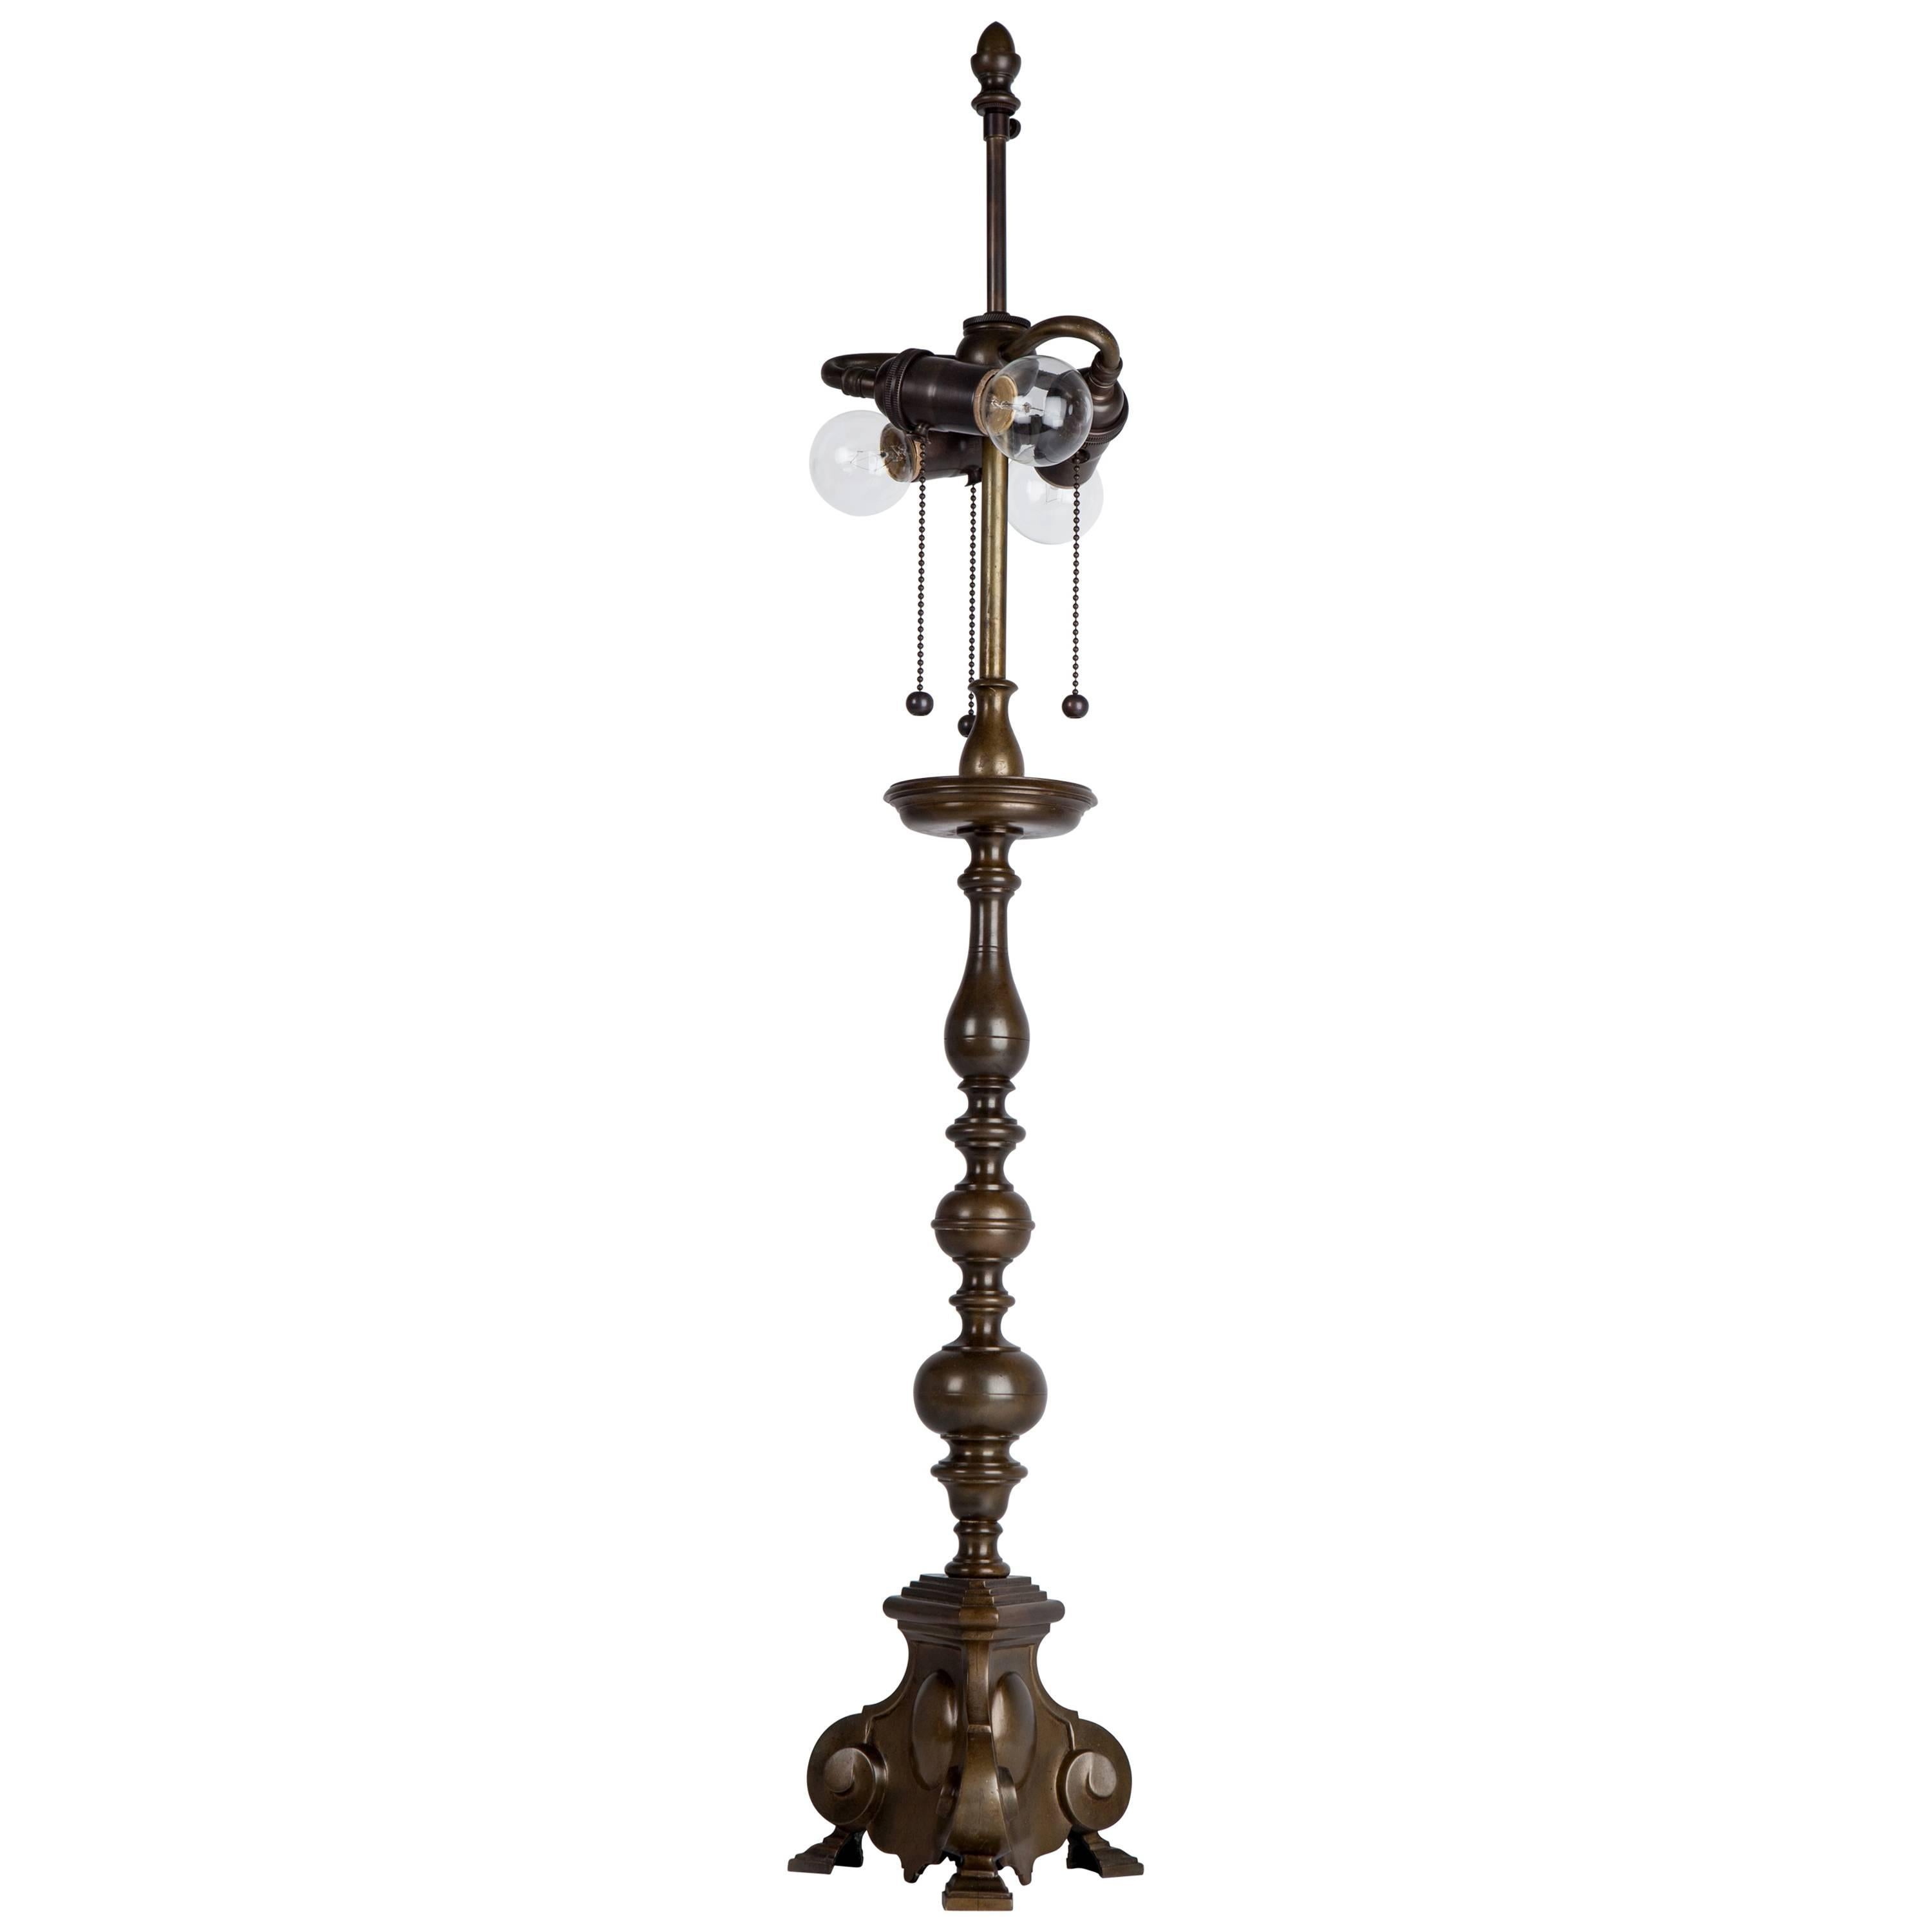 Antique Bronze Lamp with Baluster Form Body by E. F. Caldwell, Circa 1920s For Sale